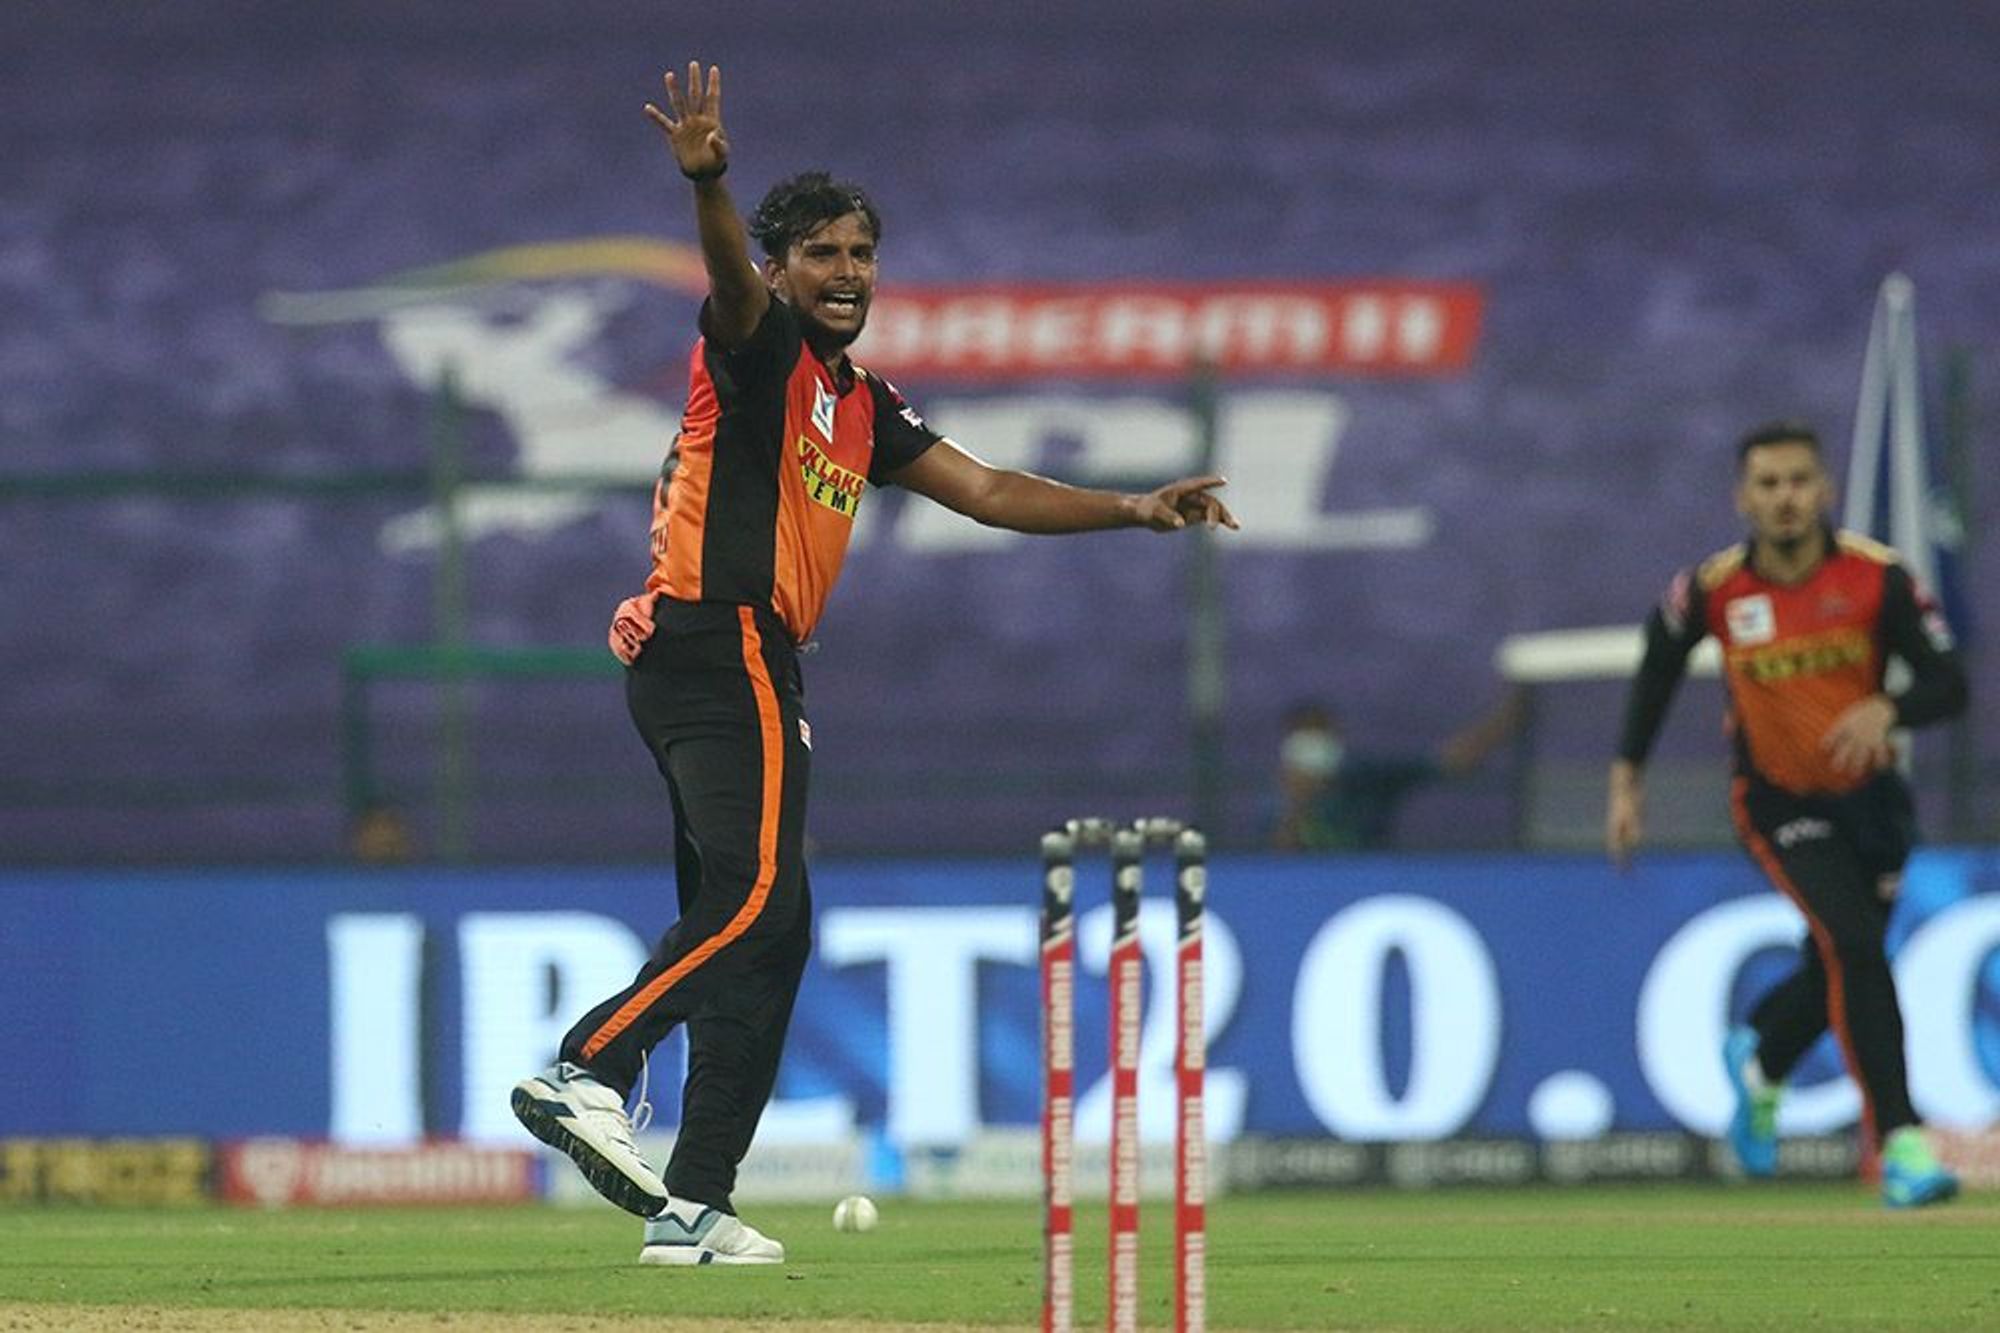 IND vs AUS | Varun Chakravarthy ruled out of Australia T20Is, T Natarajan named as replacement